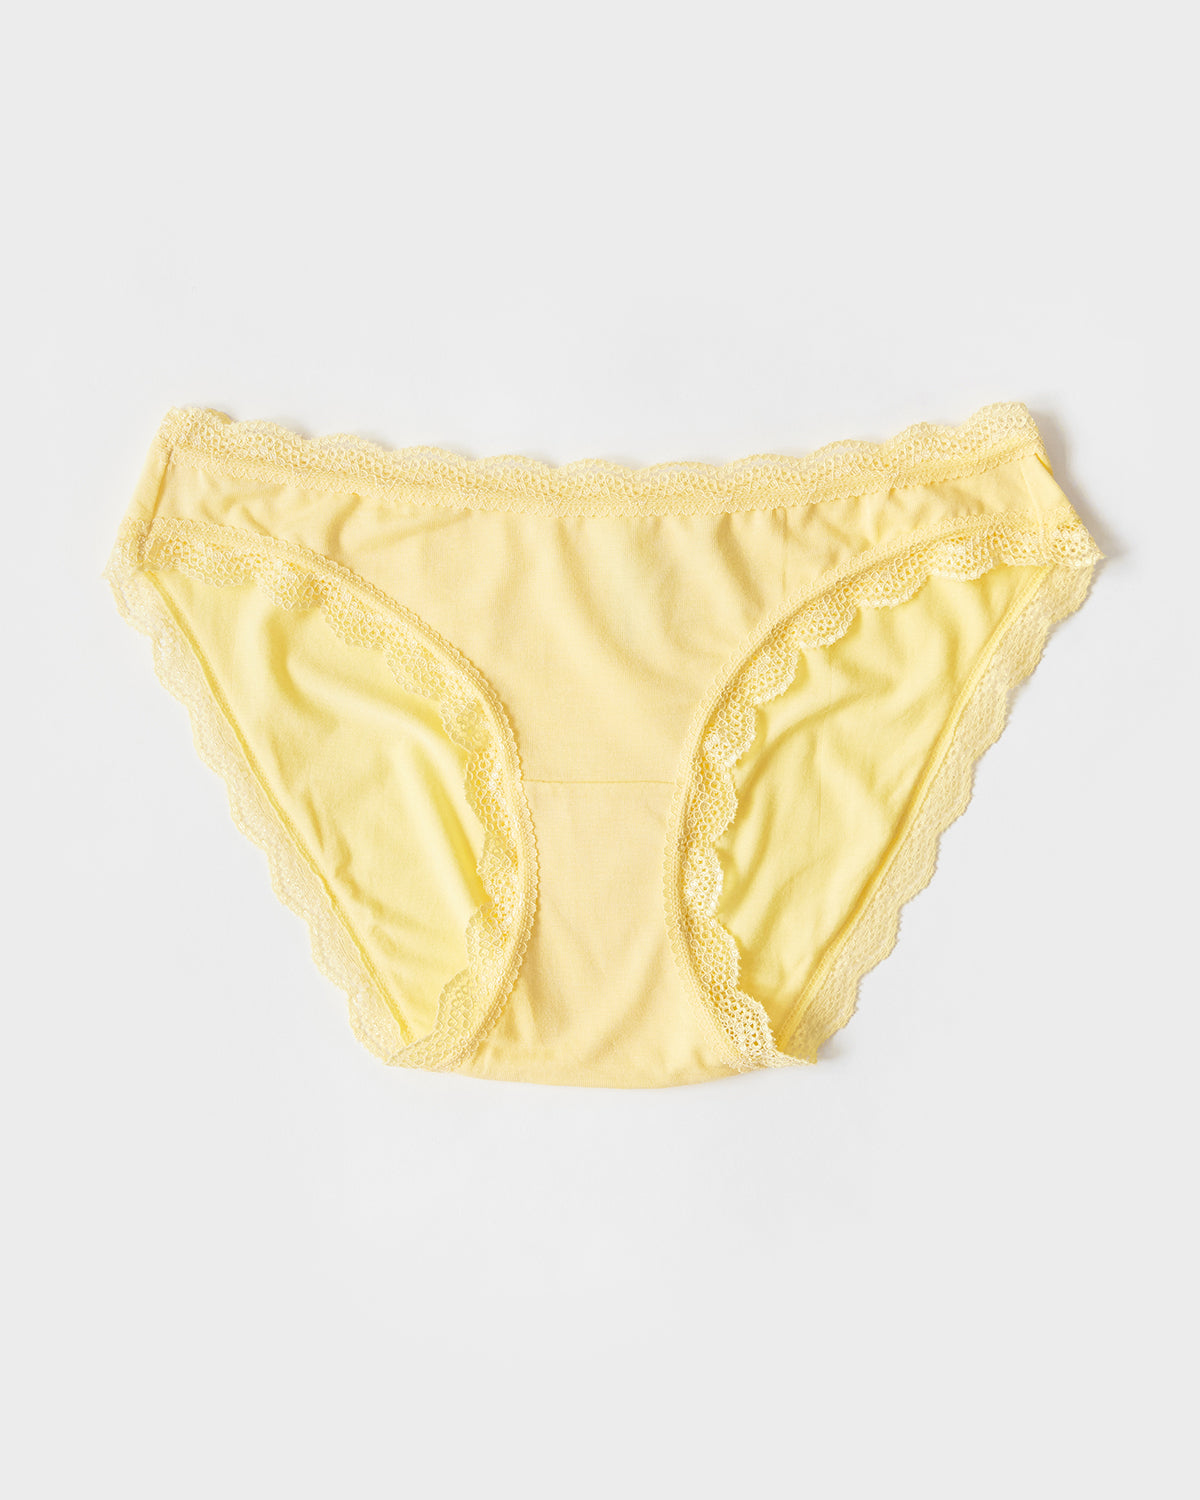 Vintage Underwear Ladies Unused Yellow Cotton Knickers With Factory Tag  Underpants Made in Era Size MEDIUM -  Canada